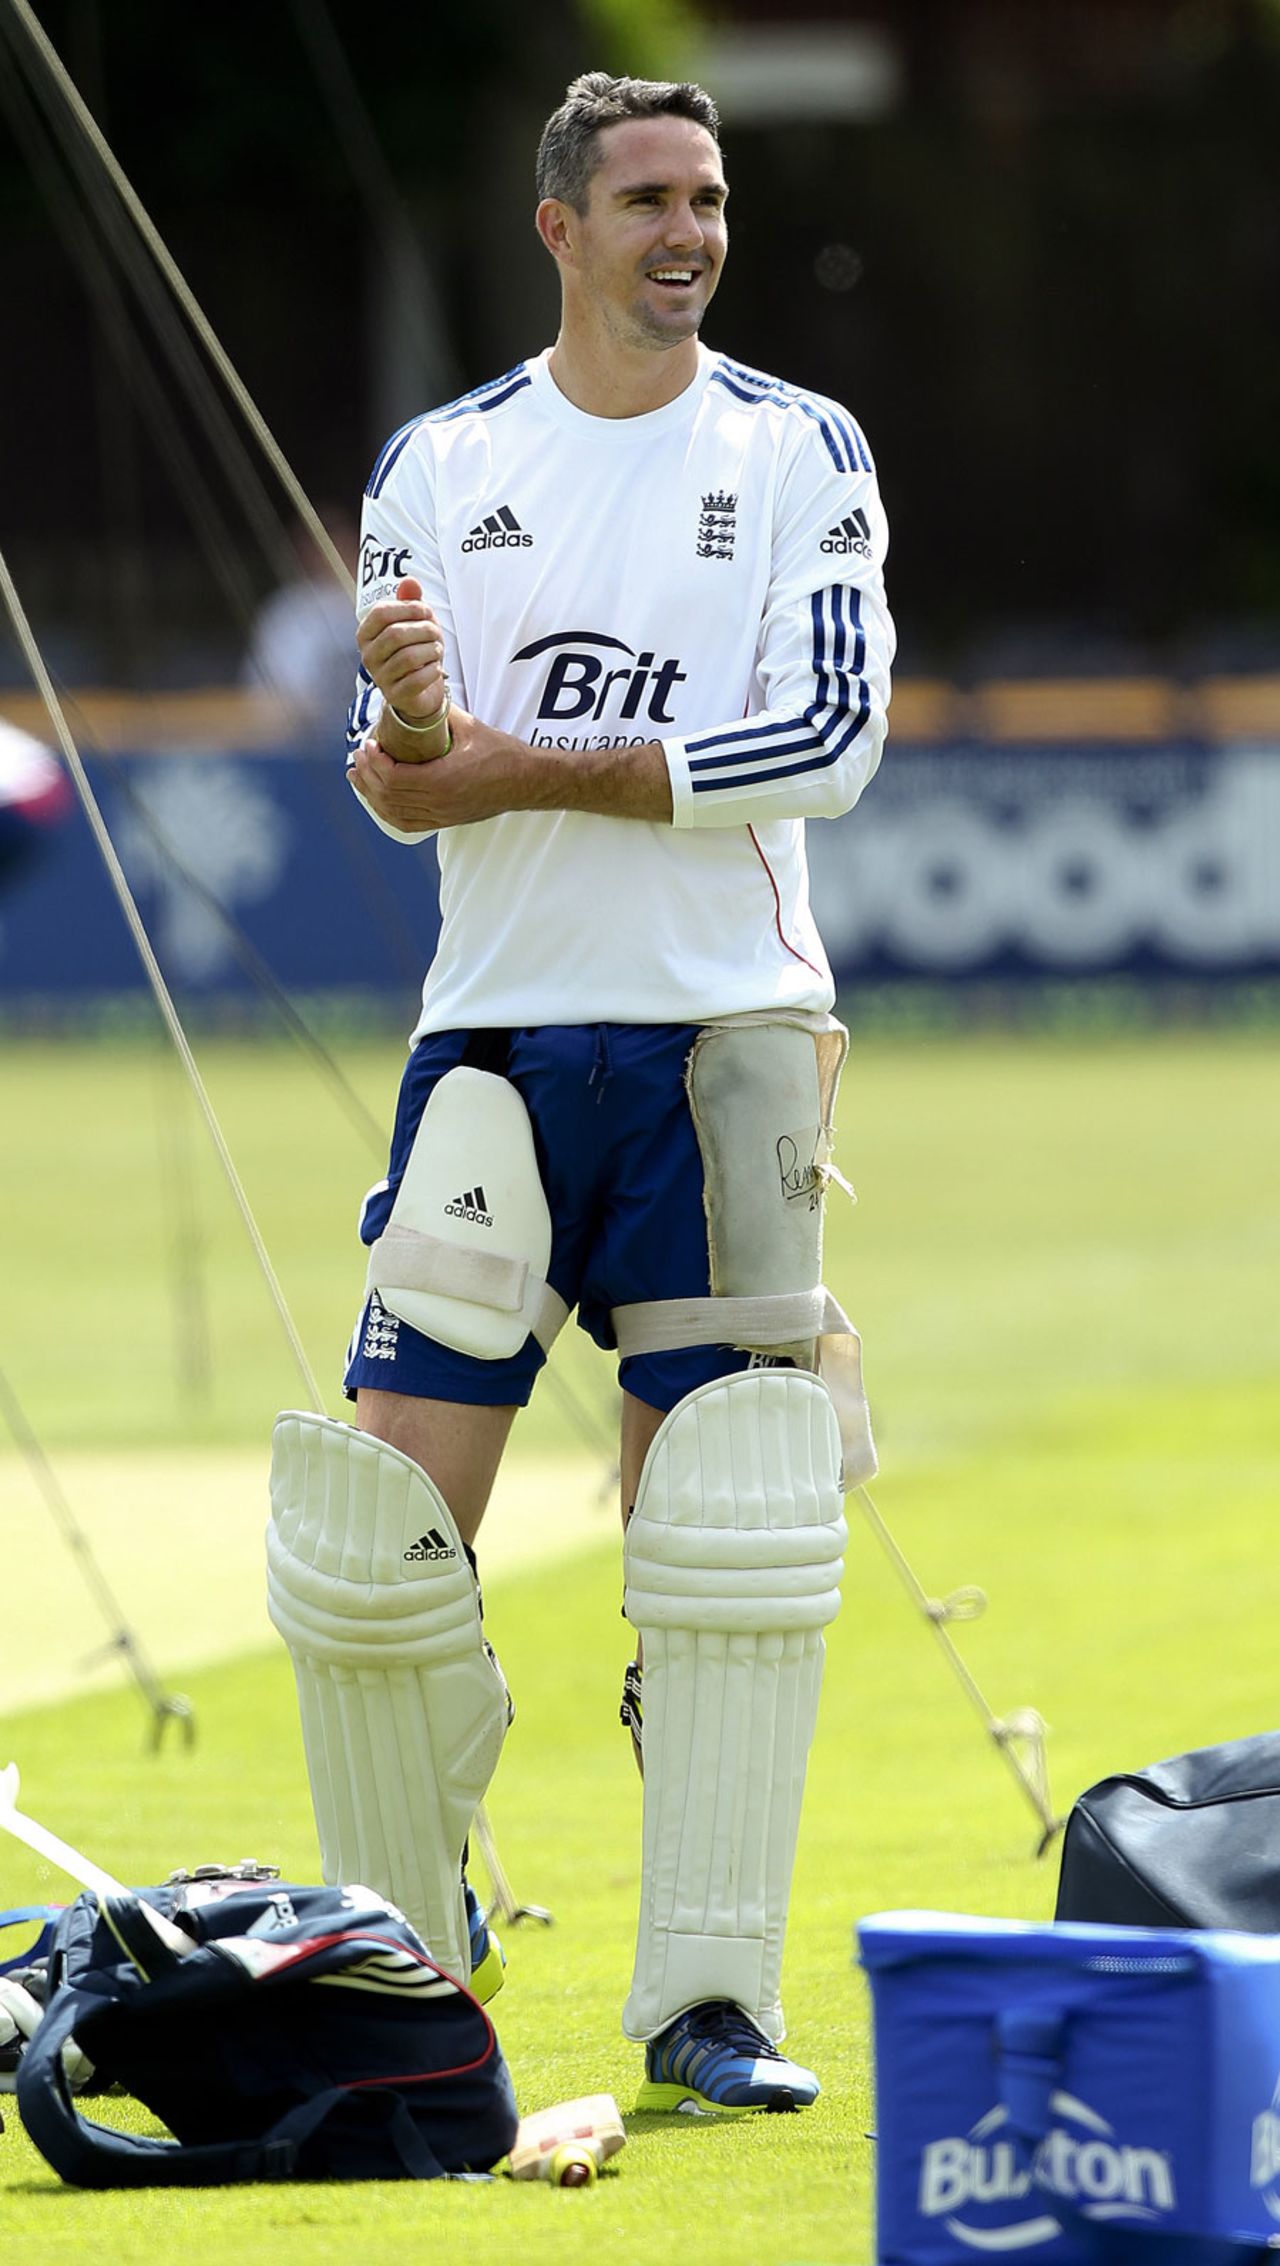 Kevin Pietersen is all smiles at practice, Chelmsford, June, 29, 2013